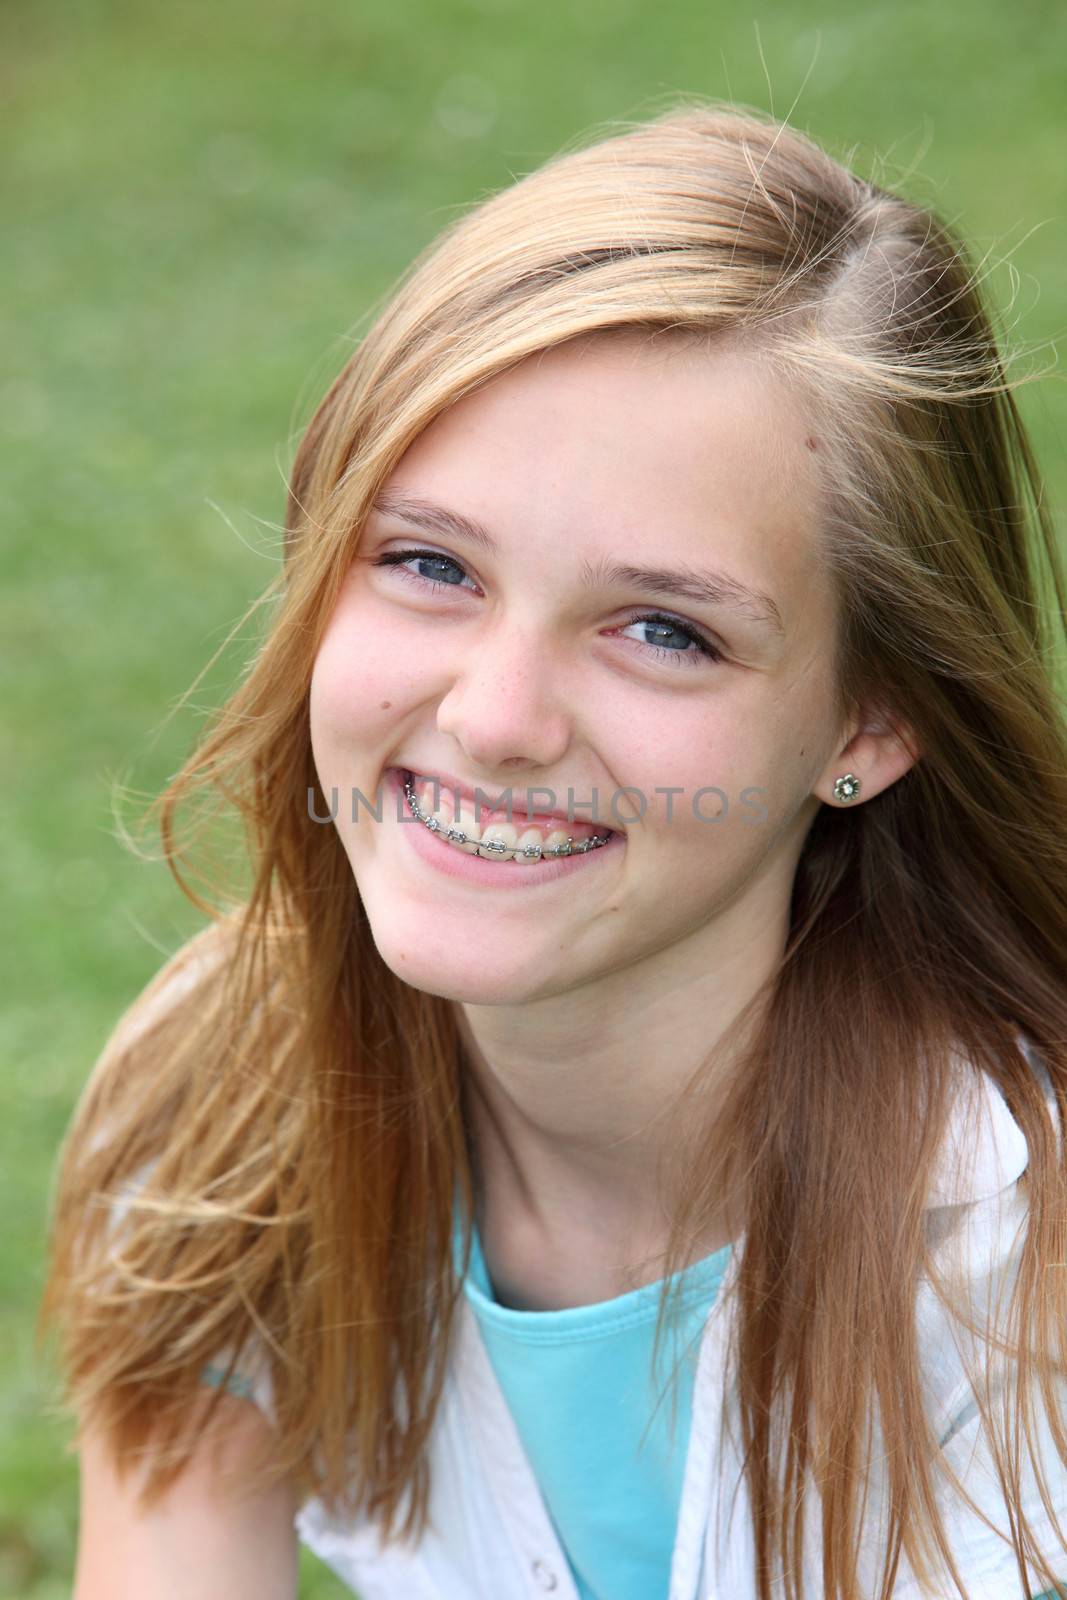 Beautiful smiling young teenager with orthodontic braces on her teeth sitting outdoors in the summer sunshine on green grass, close up head and shoulders portrait